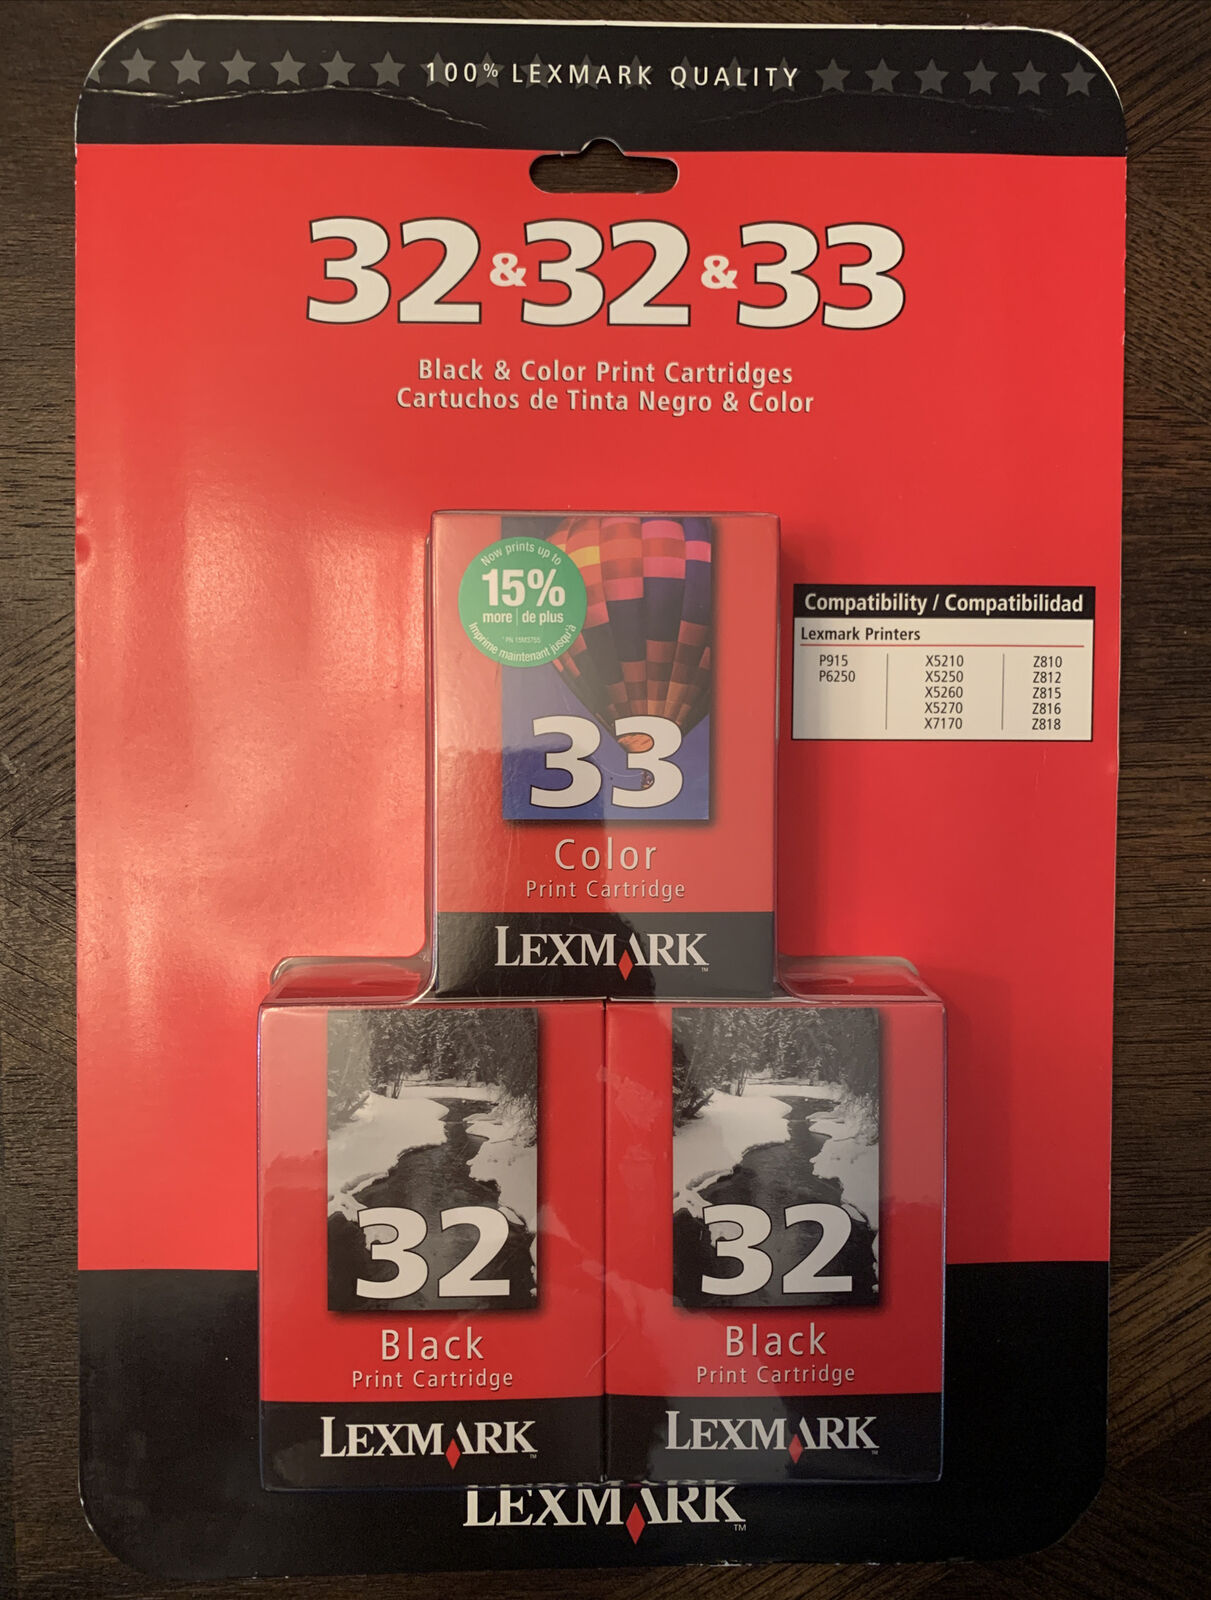 LEXMARK 32 32 33 Black & Color Ink Cartridges Factory Sealed New In Box Combo